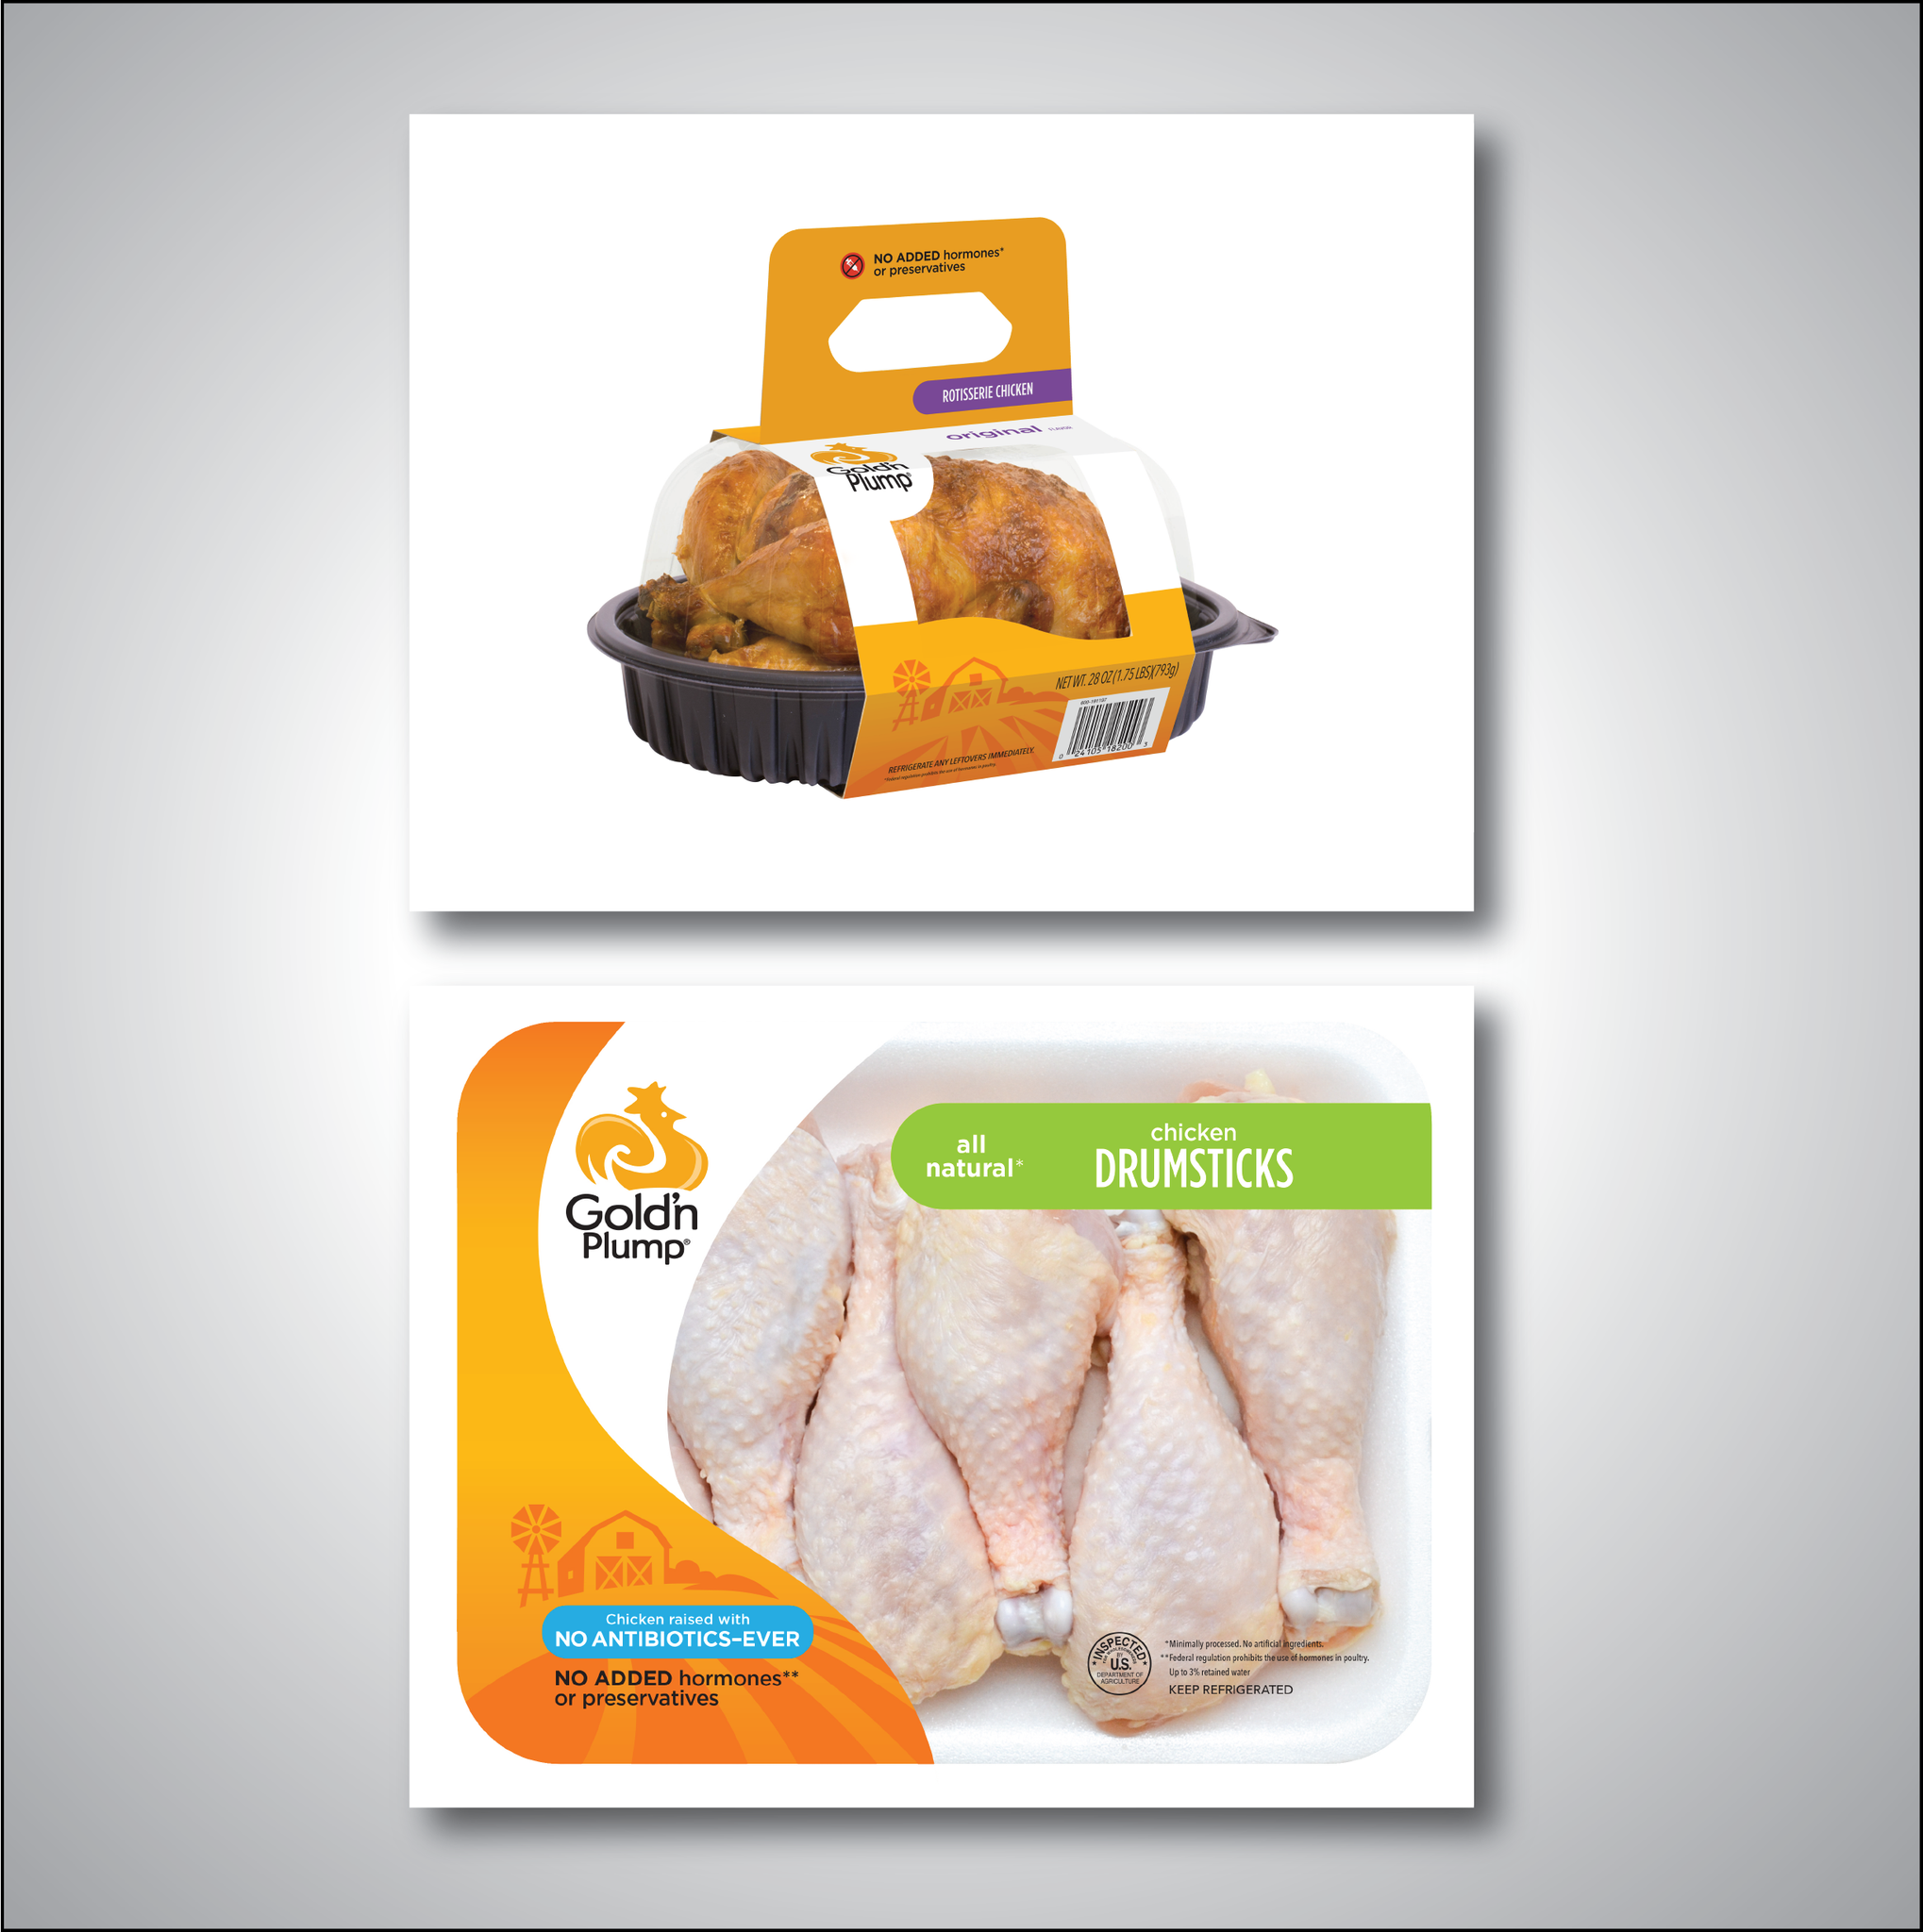 Creative Direction at Pilgrims Chicken. New branded look to Gold'n Plump Chicken packaging. 